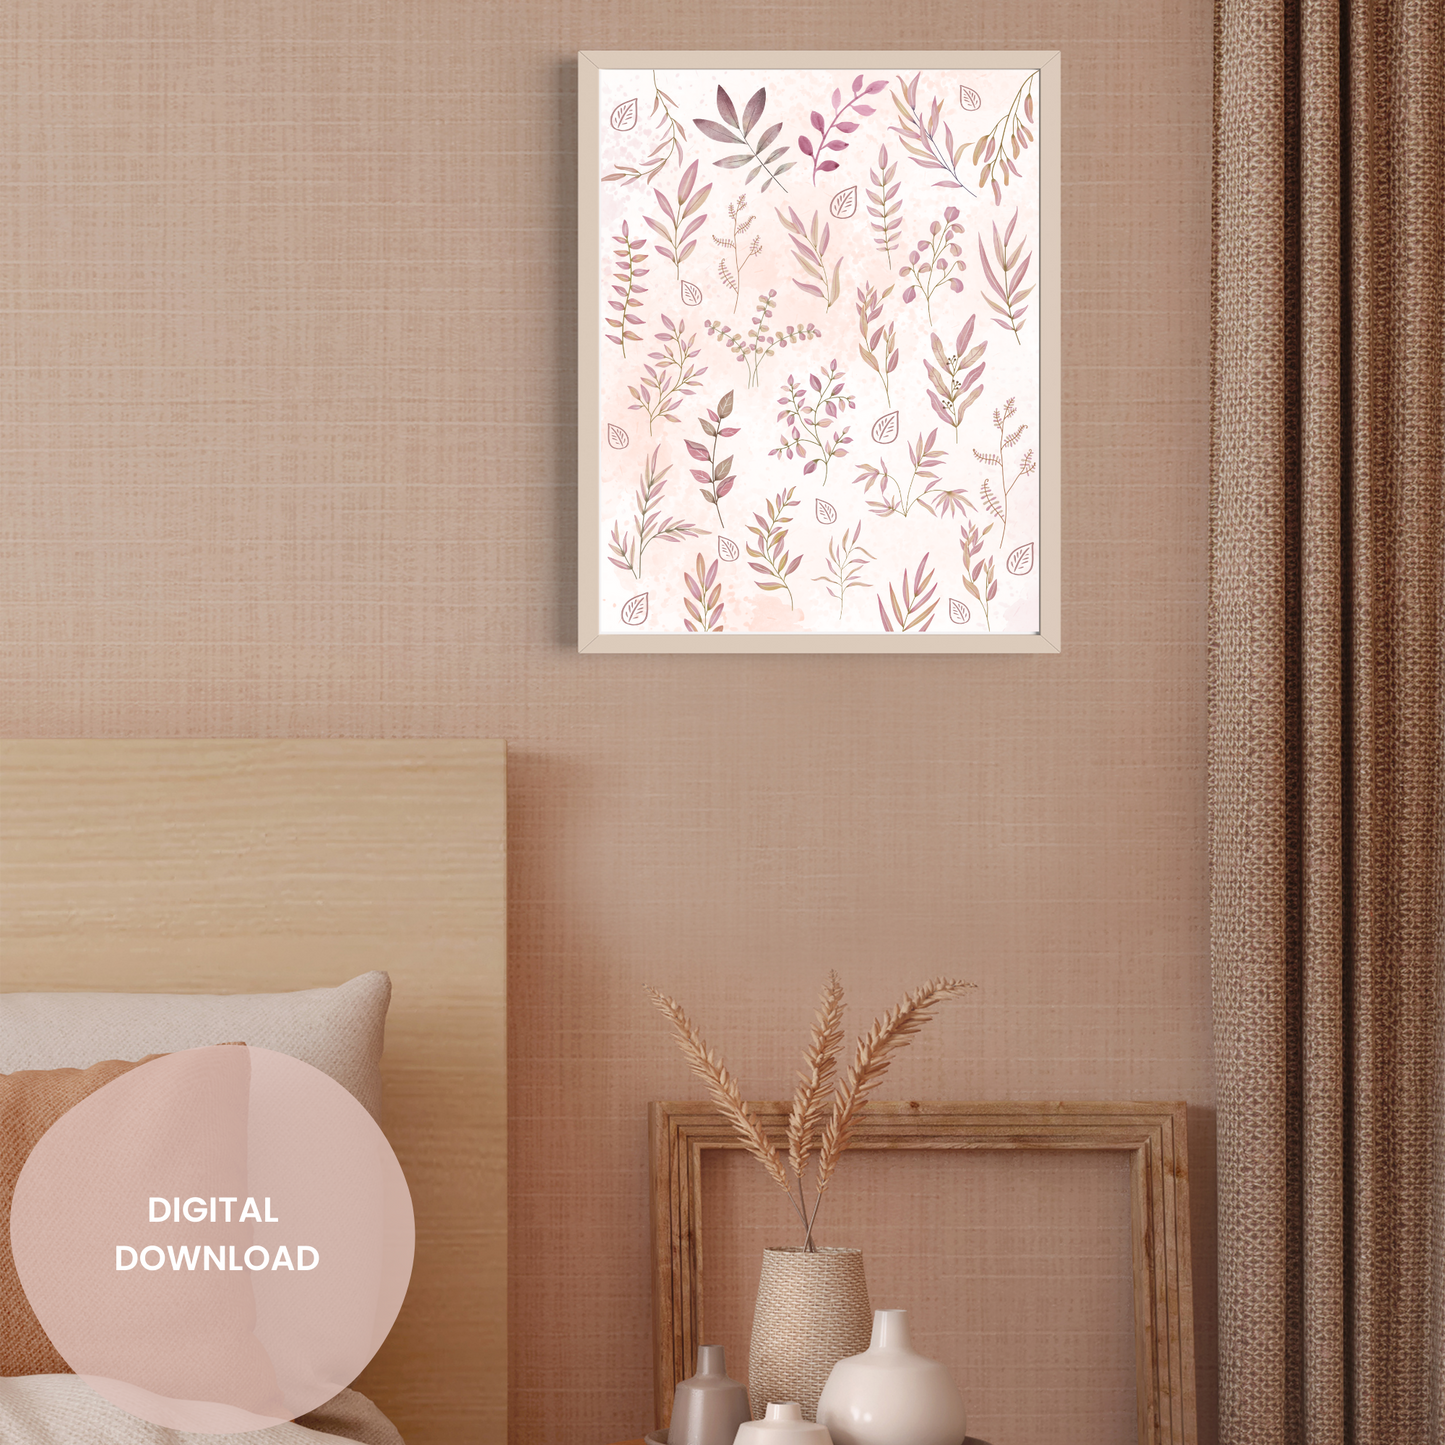 Watercolored Pink Leaves Wall Collage Poster - Serene Nature-Inspired Decor